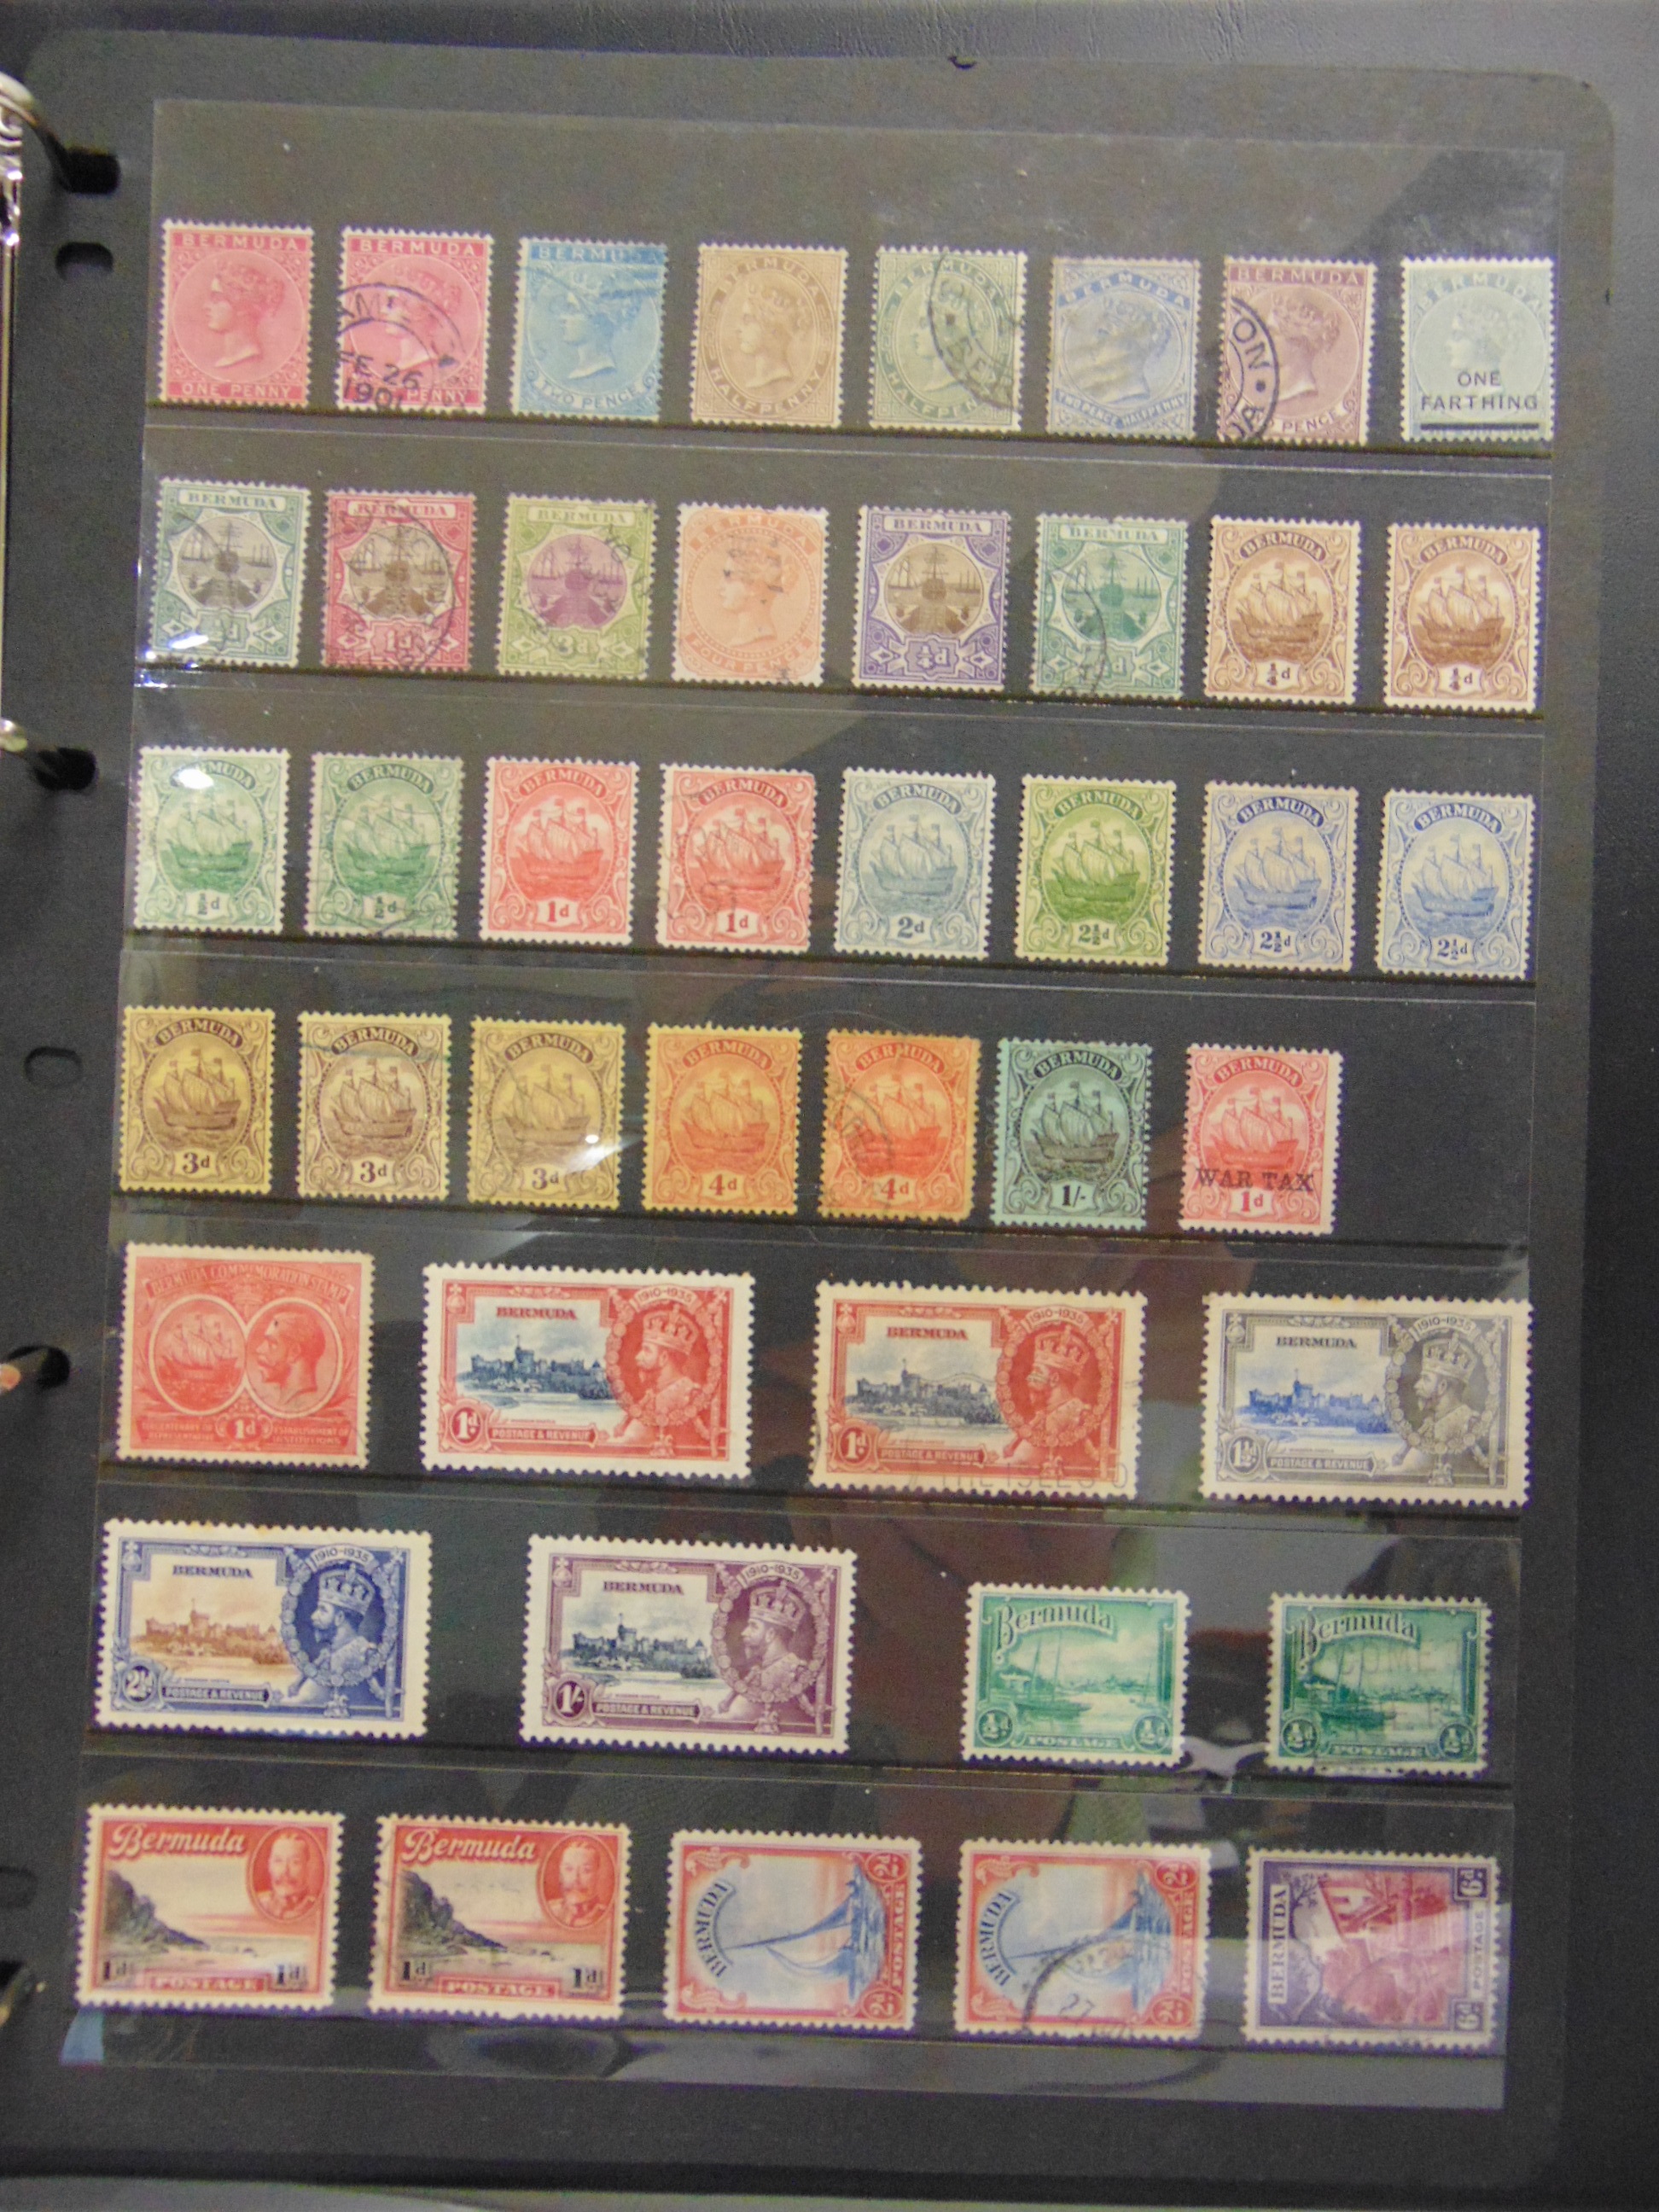 STAMPS - A PART-WORLD COLLECTION including Antigua, Ascension, Bechuanaland, Botswana, Barbados, - Image 6 of 8